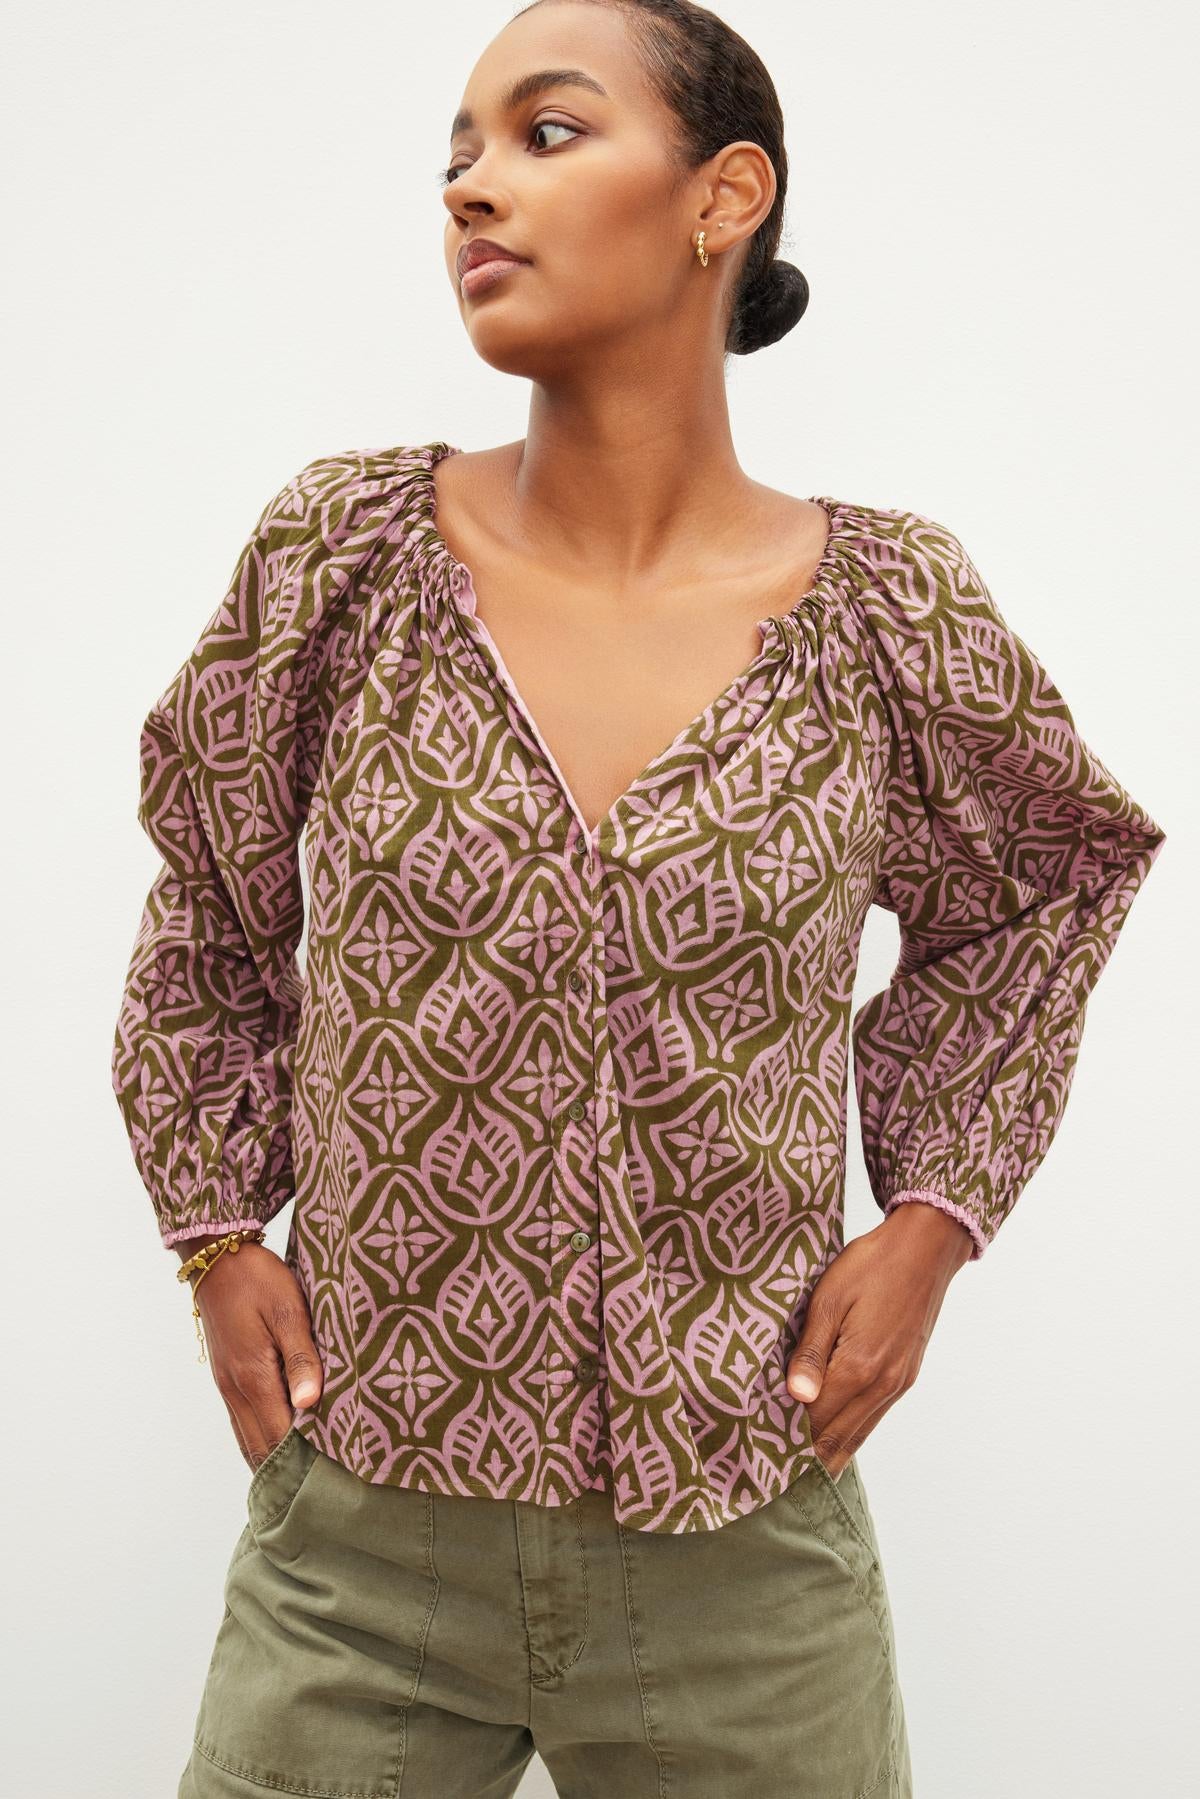 The model is wearing a chic ensemble - a Velvet by Graham & Spencer MARIAN PRINTED BUTTON FRONT TOP.-36040414920897